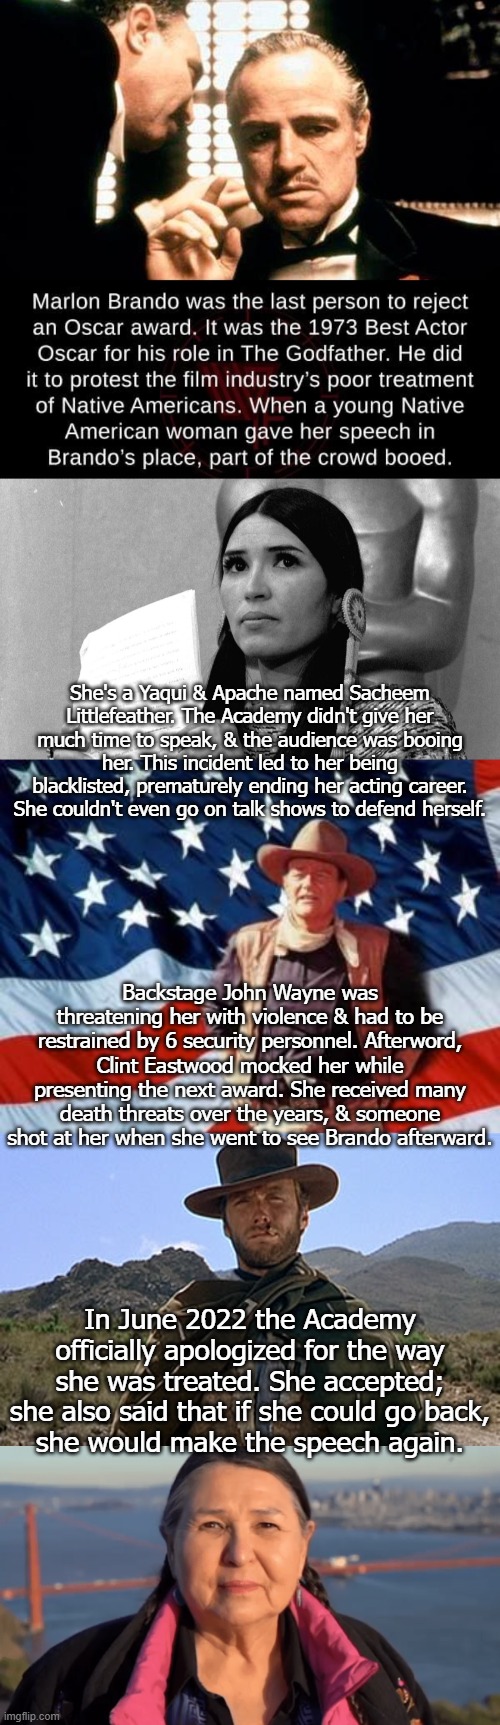 Unlike Will Smith, John Wayne was not banned from the Oscars. | She's a Yaqui & Apache named Sacheem Littlefeather. The Academy didn't give her much time to speak, & the audience was booing her. This incident led to her being blacklisted, prematurely ending her acting career. She couldn't even go on talk shows to defend herself. Backstage John Wayne was threatening her with violence & had to be restrained by 6 security personnel. Afterword, Clint Eastwood mocked her while presenting the next award. She received many death threats over the years, & someone
shot at her when she went to see Brando afterward. In June 2022 the Academy officially apologized for the way she was treated. She accepted; she also said that if she could go back,
she would make the speech again. | image tagged in marlon brando oscar rejection,john wayne american flag,clint eastwood - western,native american,racism,scumbag hollywood | made w/ Imgflip meme maker